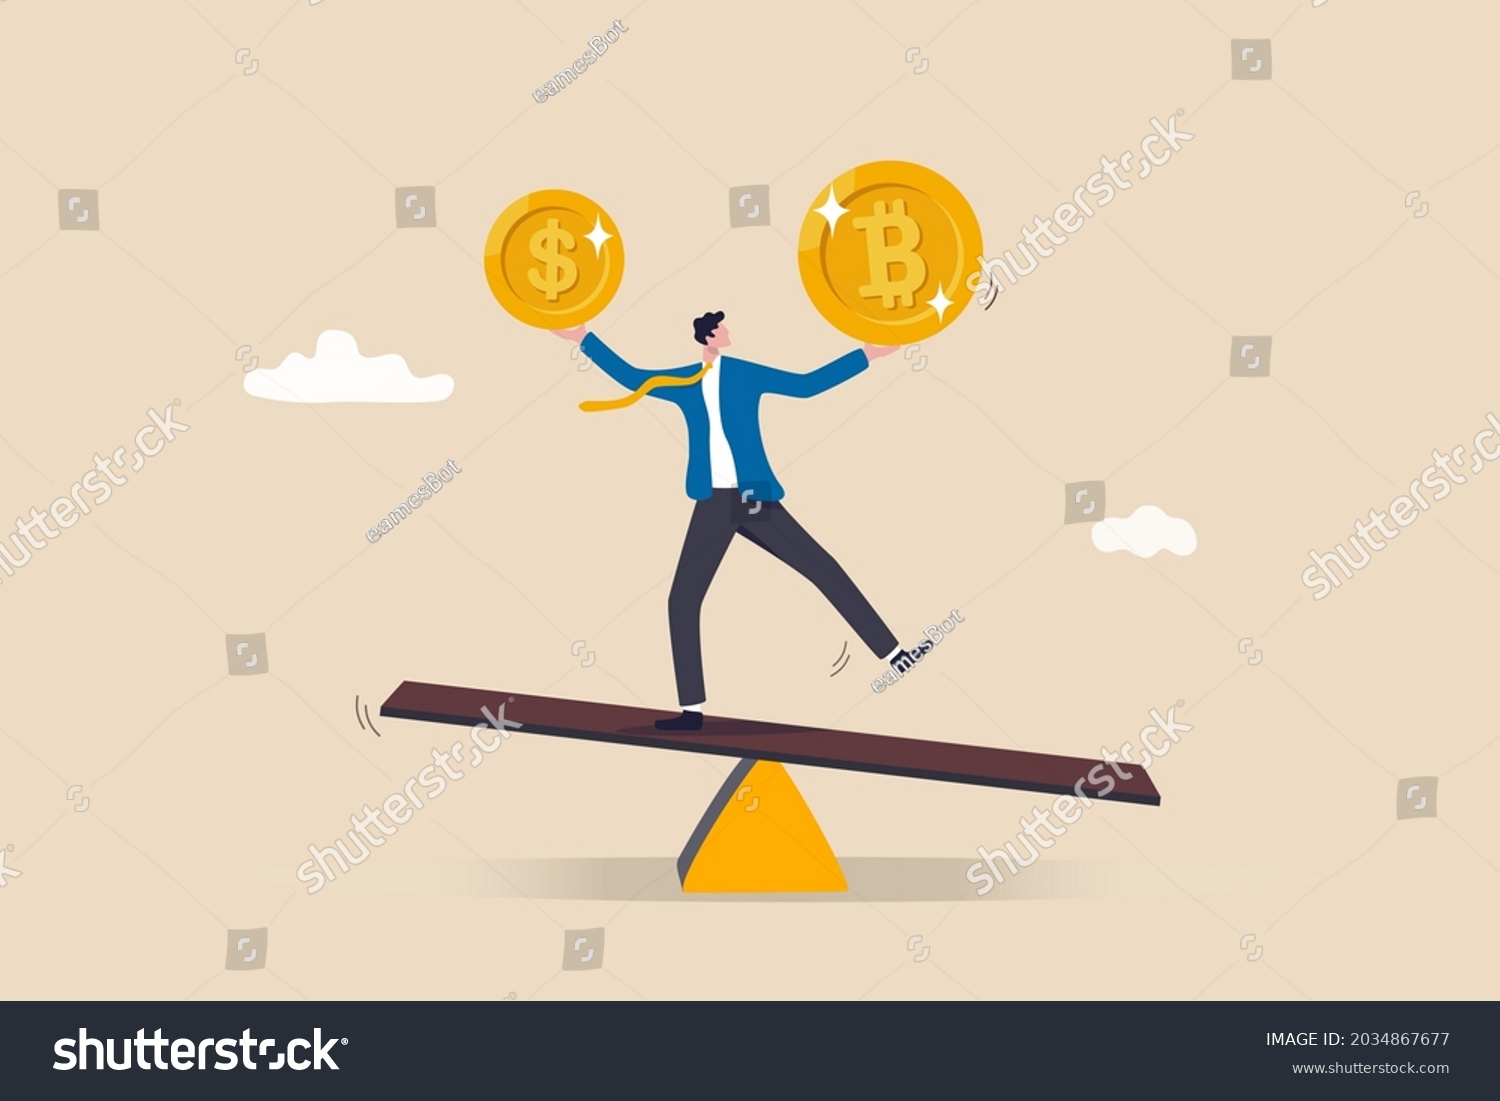 Investment portfolio with Bitcoin or crypto currency, buy or sell trading, crypto market exchange value concept, businessman investor or trader balance portfolio with dollar coin and bitcoin. #2034867677